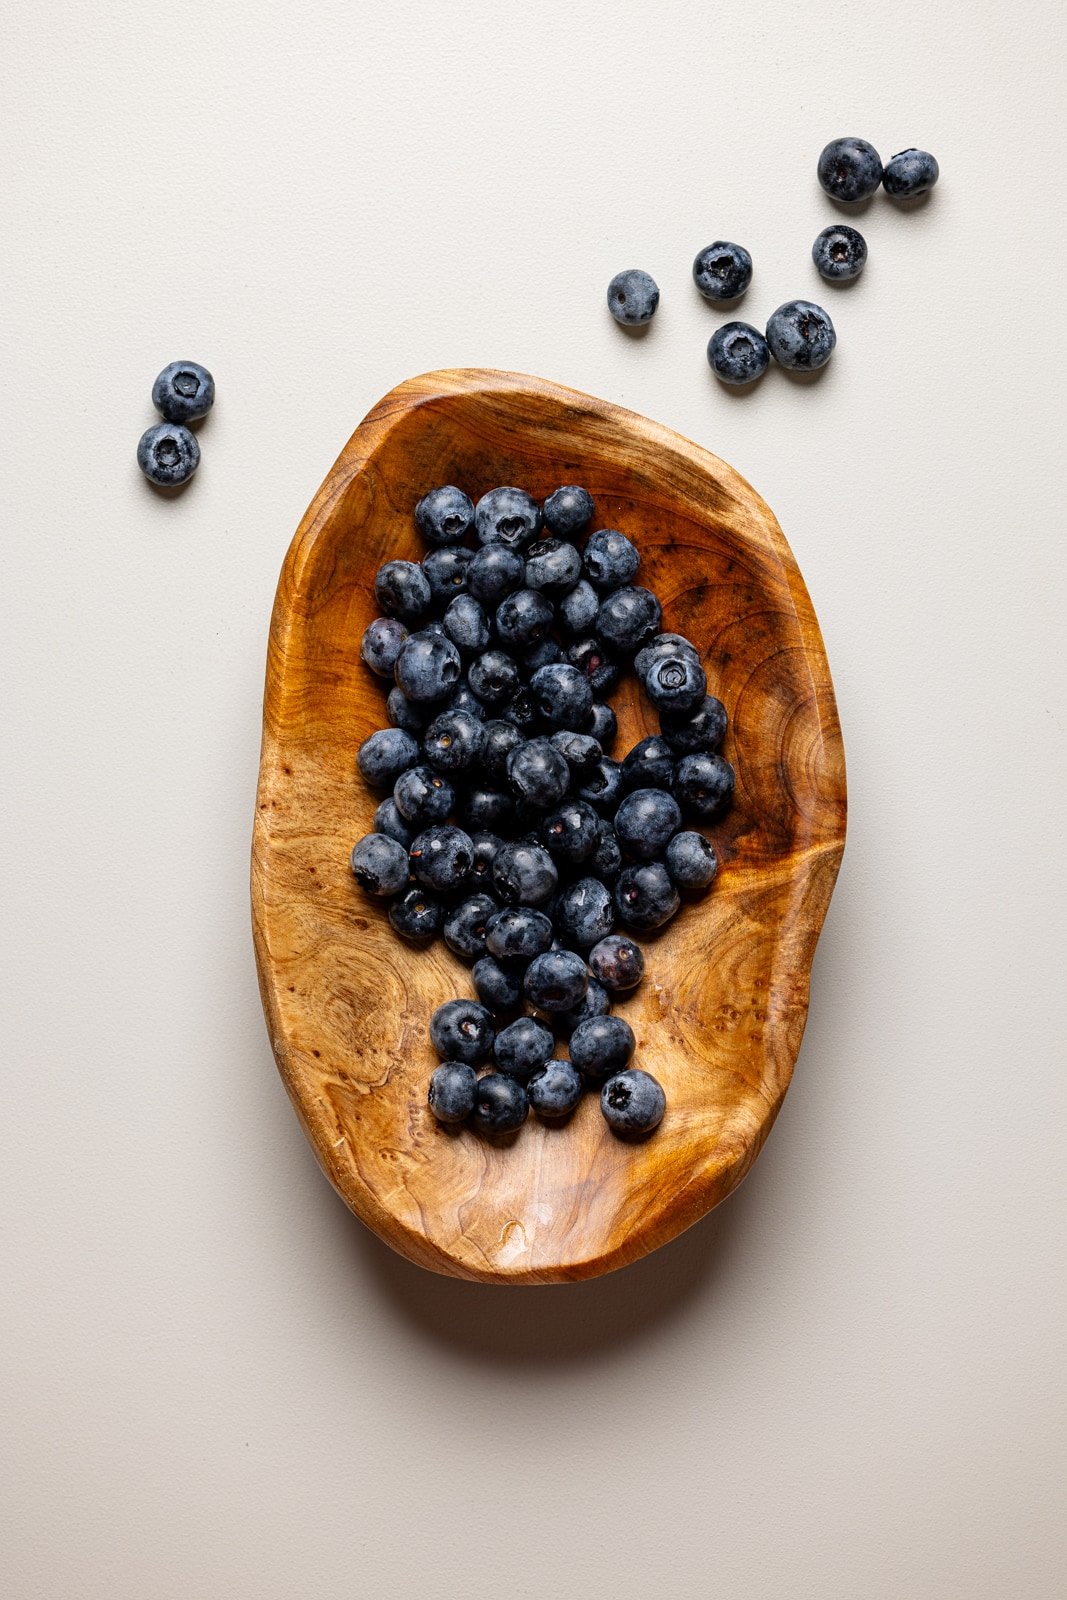 Blueberries in a brown bowl on a grey table.